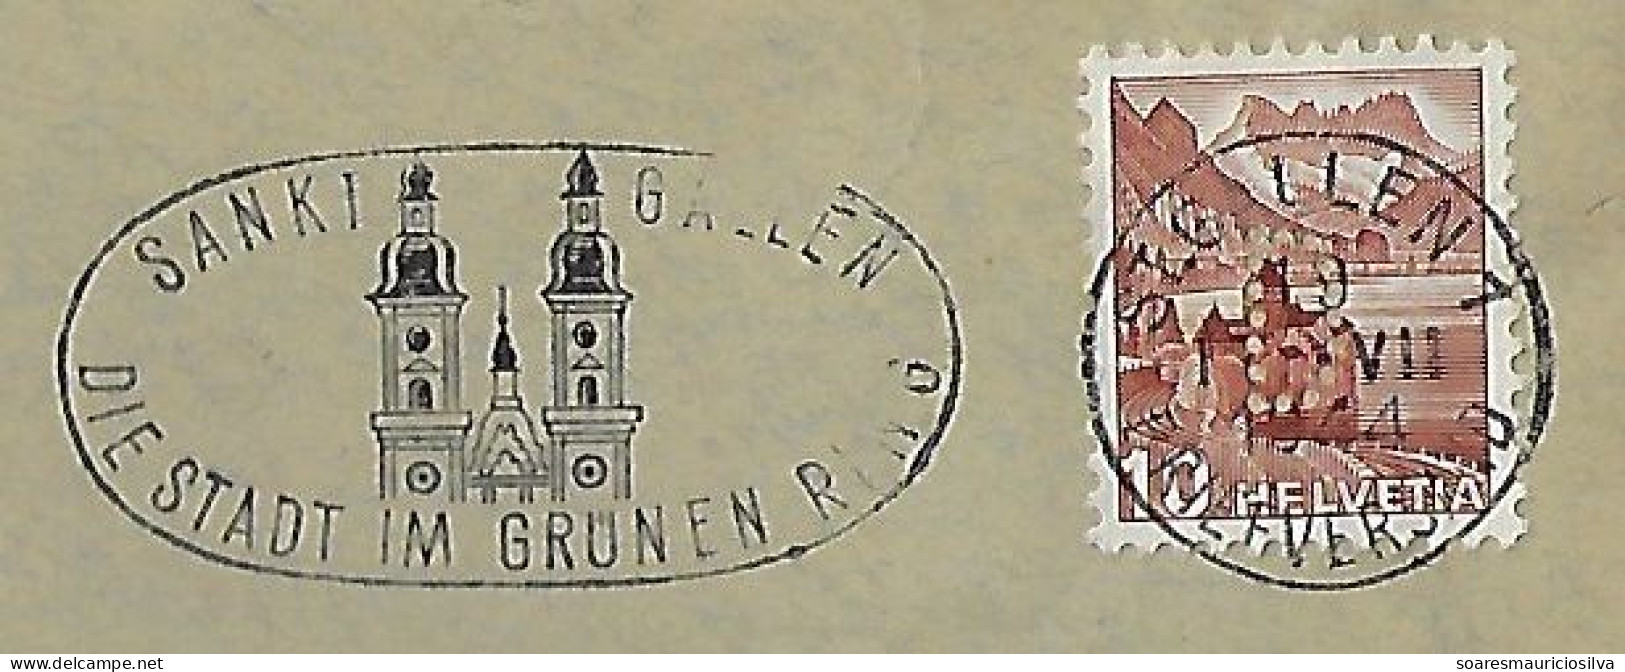 Switzerland 1944 Cover Stamp With Perfin DC By Danzas & Cie International Transport Slogan Cancel Abbey Of St Gallen - Perforés